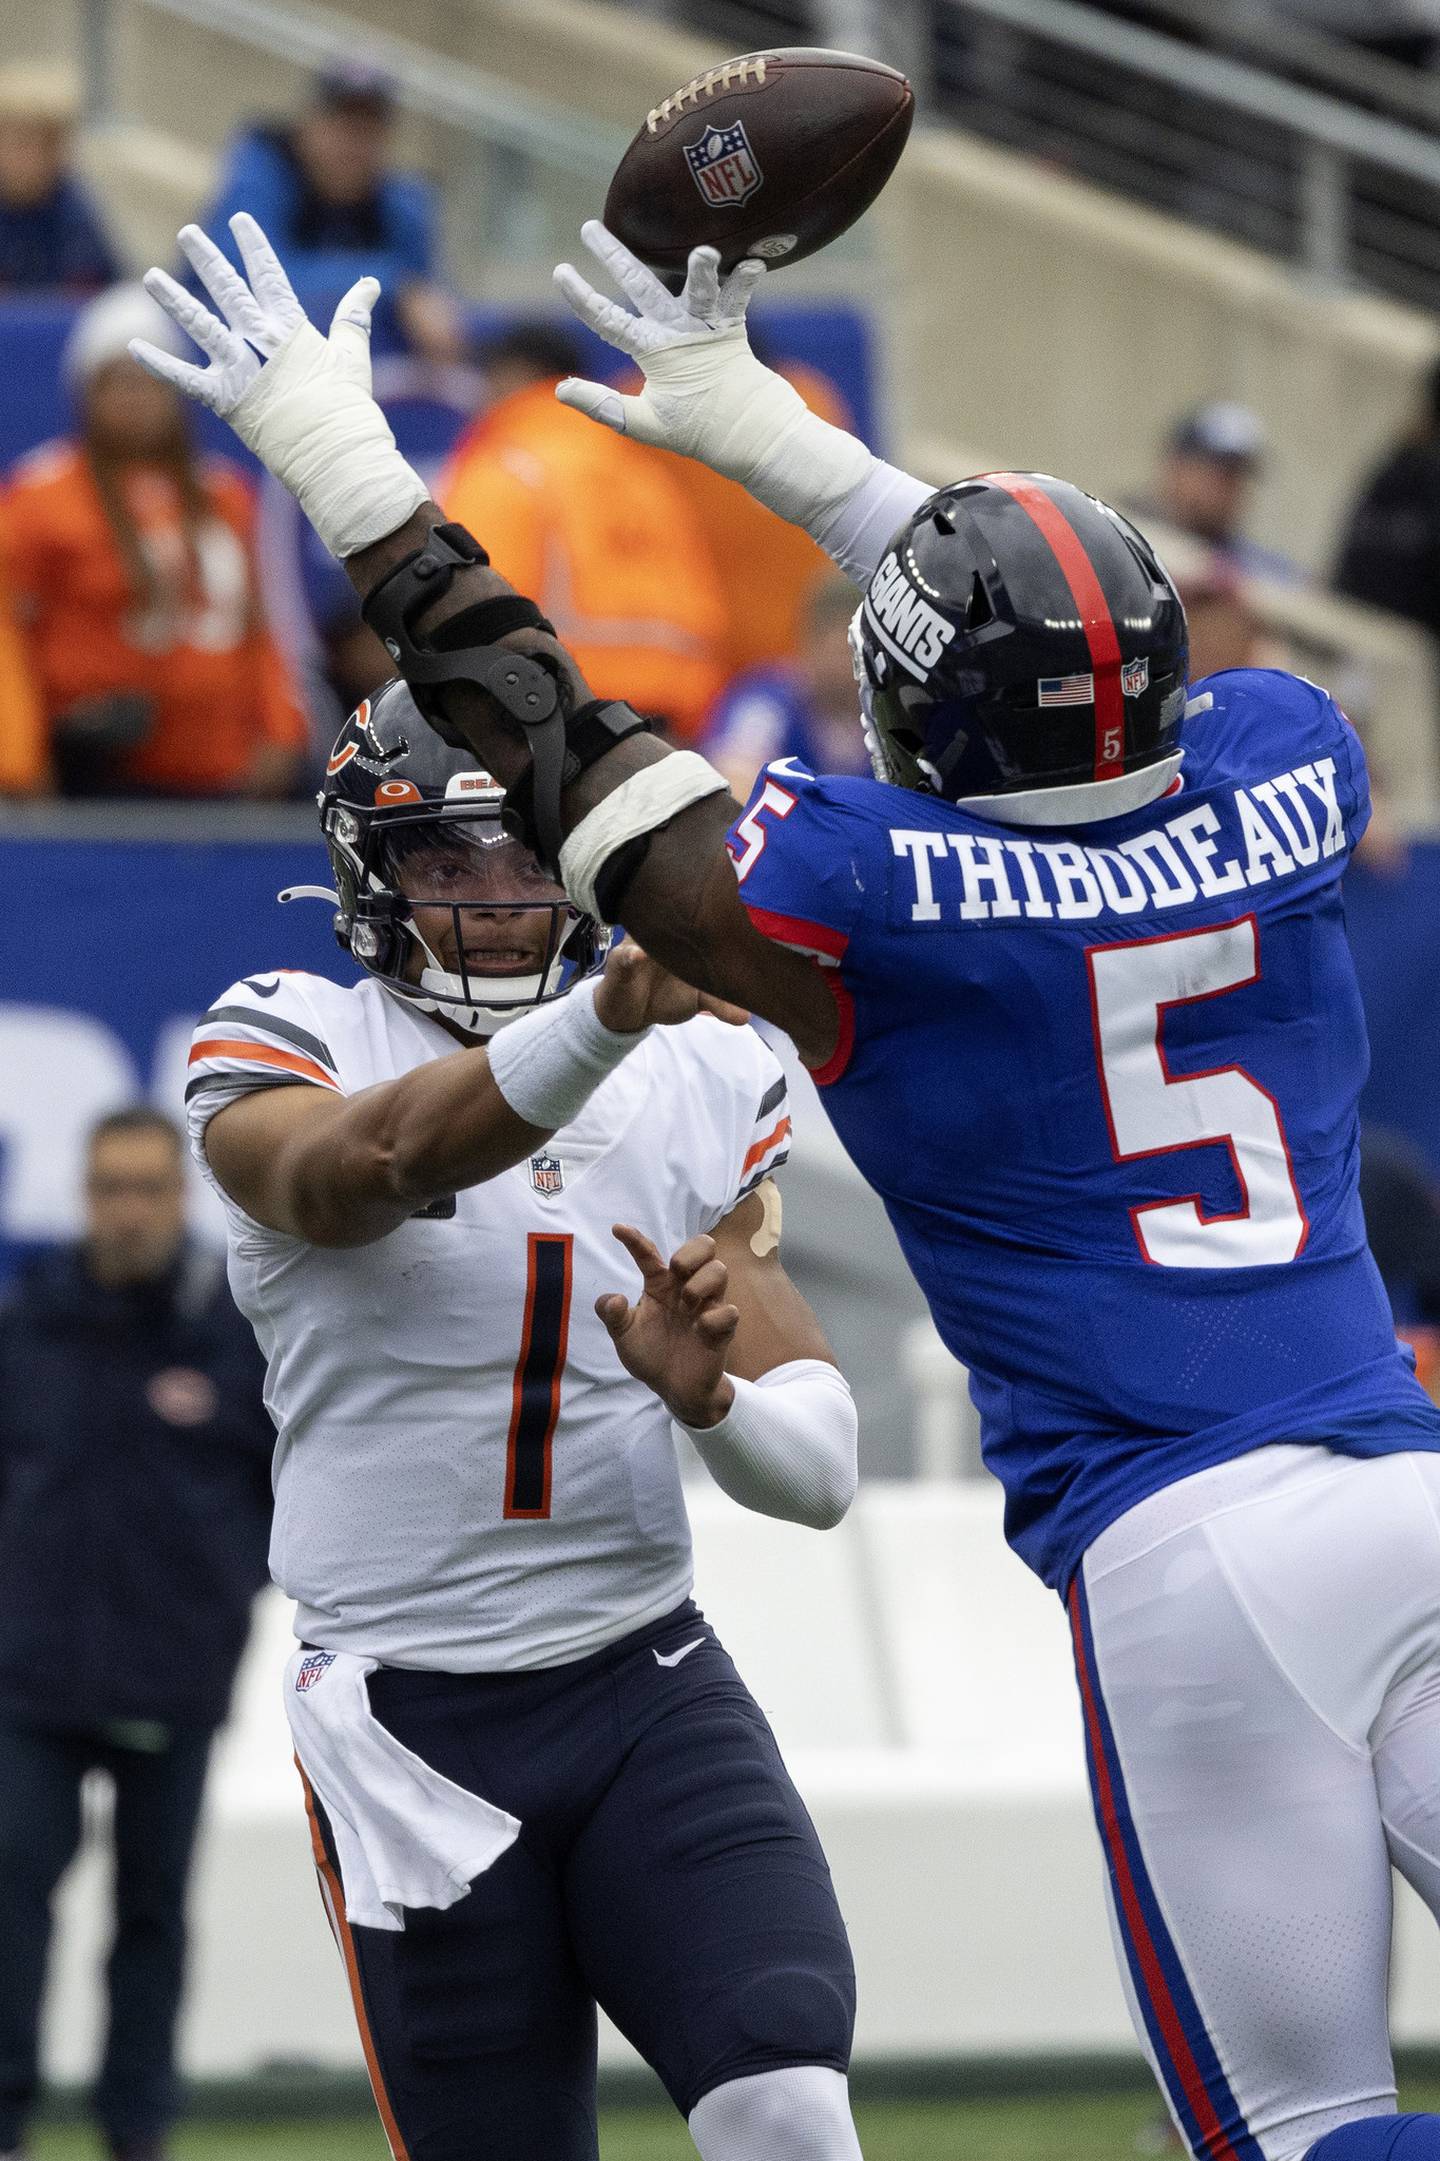 Bears quarterback Justin Fields throws over Giants defensive end Kayvon Thibodeaux during the first quarter on Oct. 12, 2022, at MetLife Stadium.